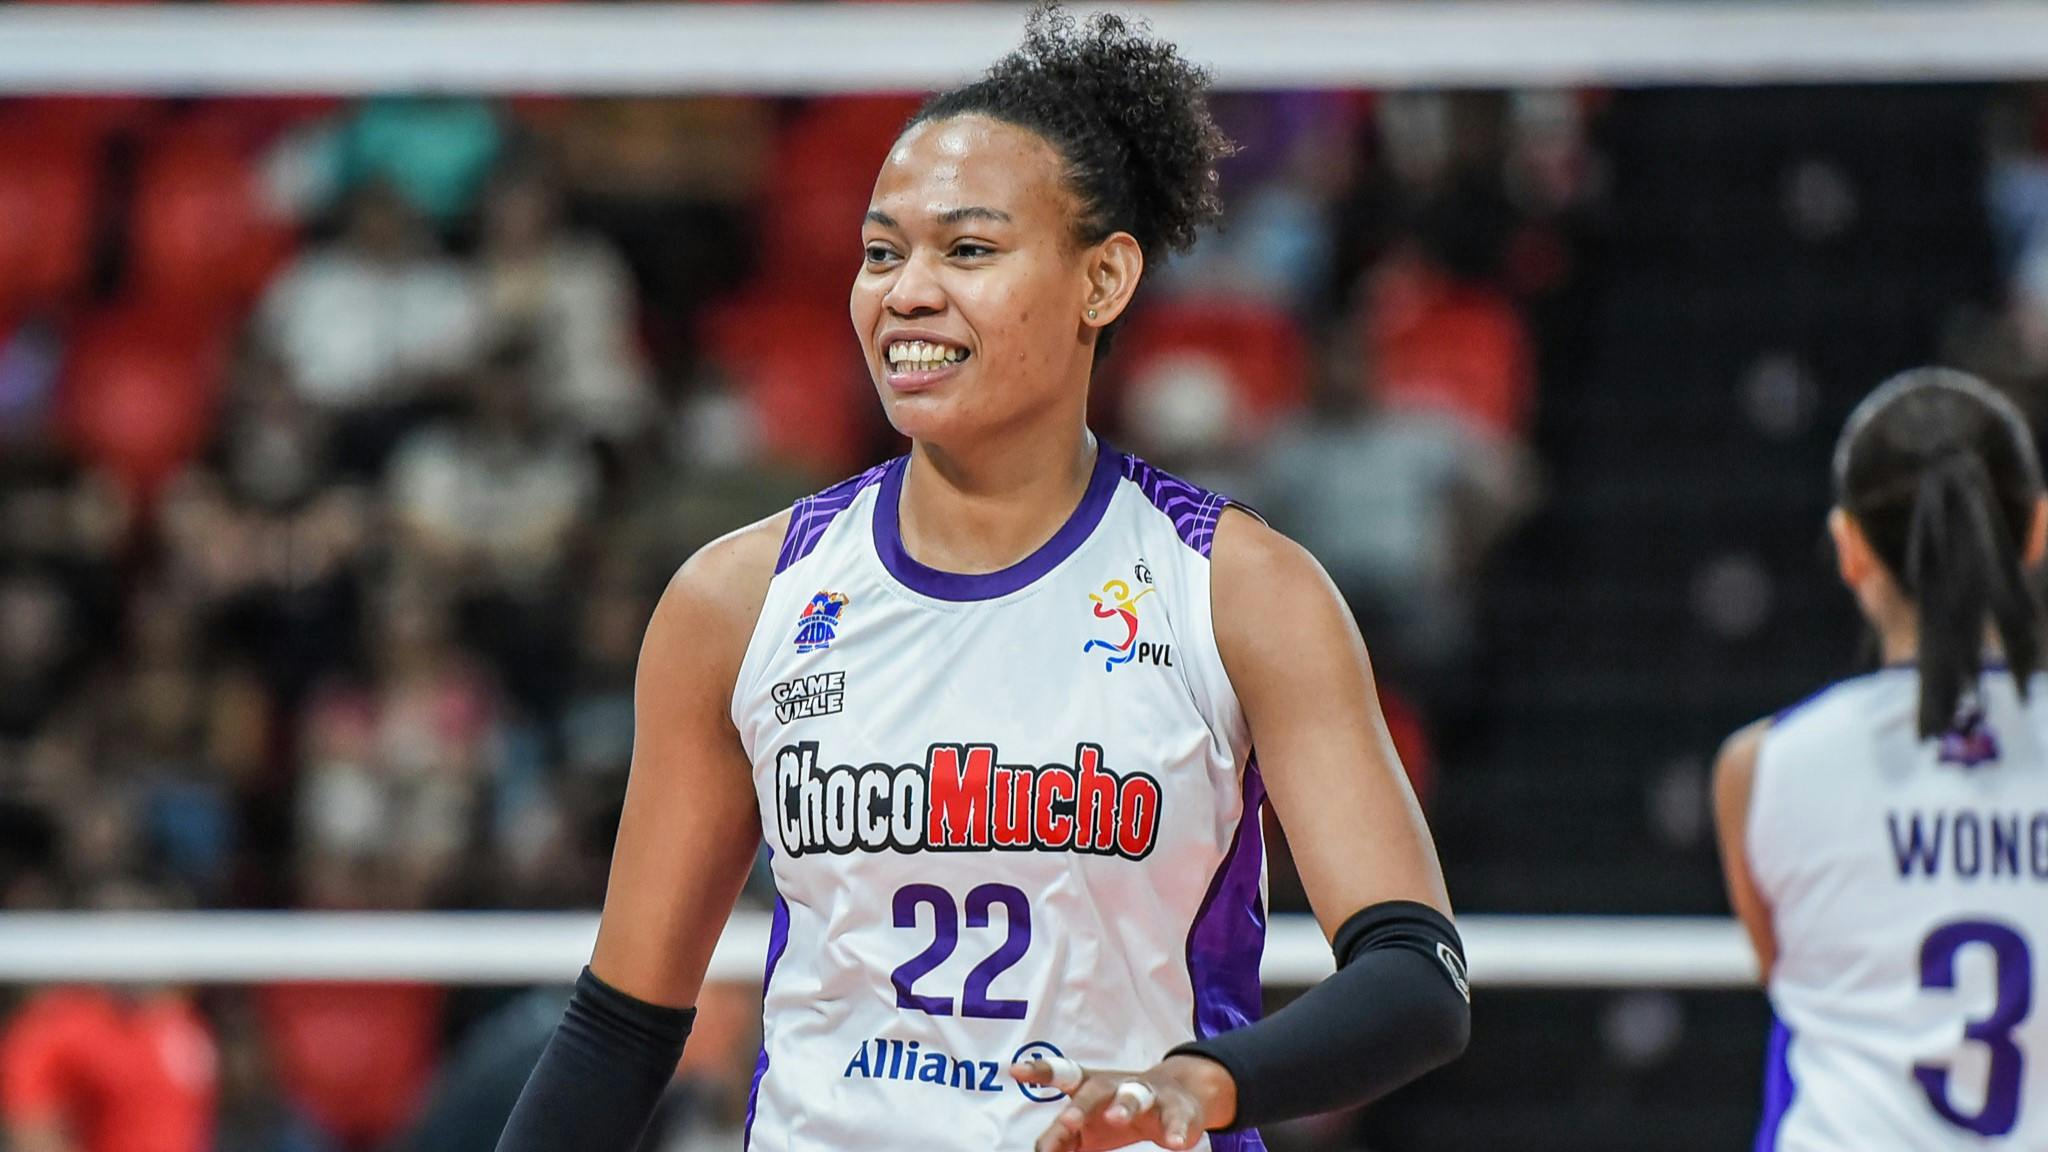 PVL: Hard work pays off for Cherry Nunag in Choco Mucho rout of Galeries Tower, says Dante Alinsunurin